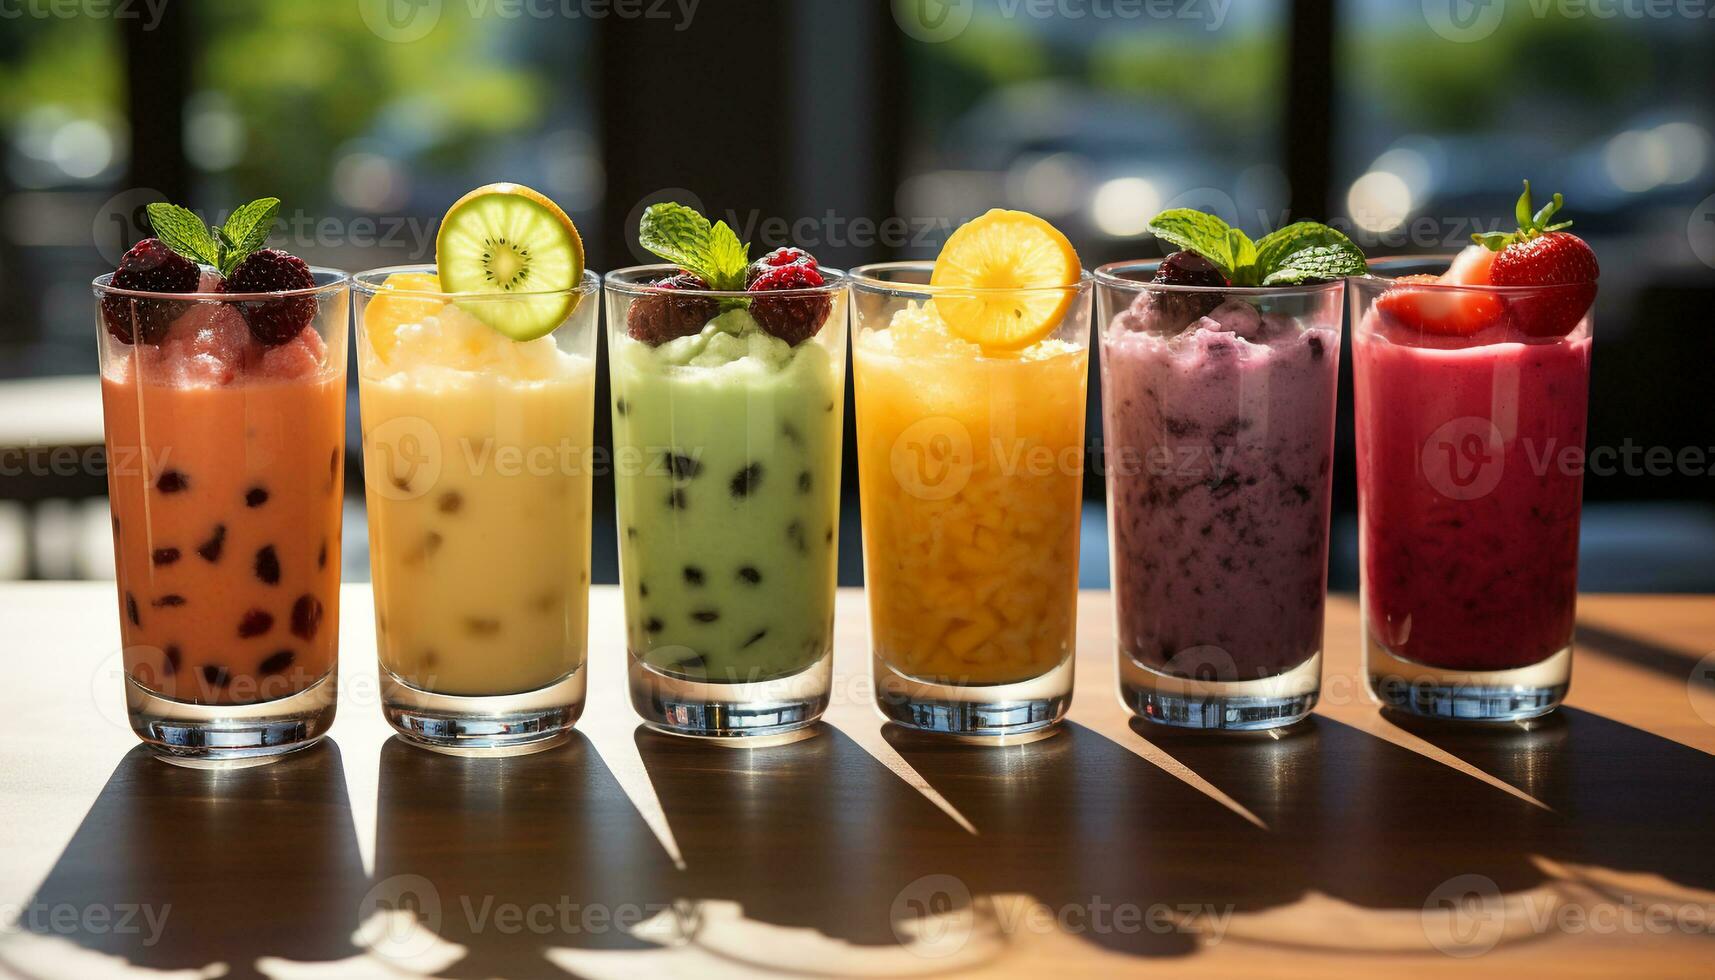 Freshness and sweetness in a glass, a fruity summer refreshment generated by AI photo